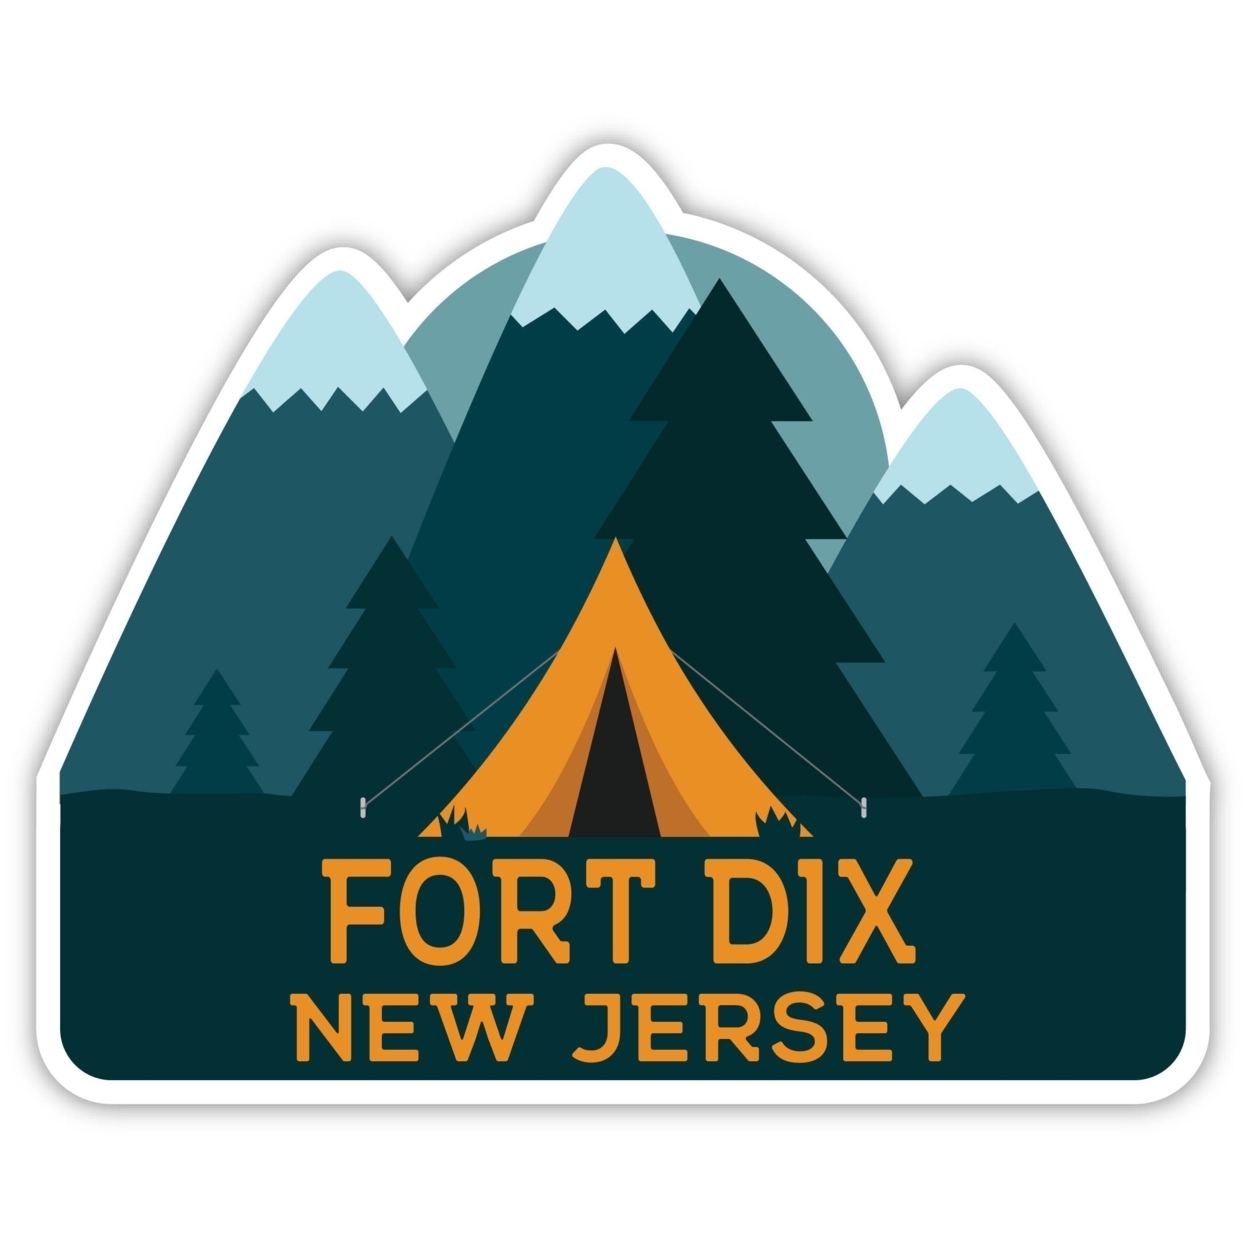 Fort Dix New Jersey Souvenir Decorative Stickers (Choose Theme And Size) - 4-Pack, 2-Inch, Tent